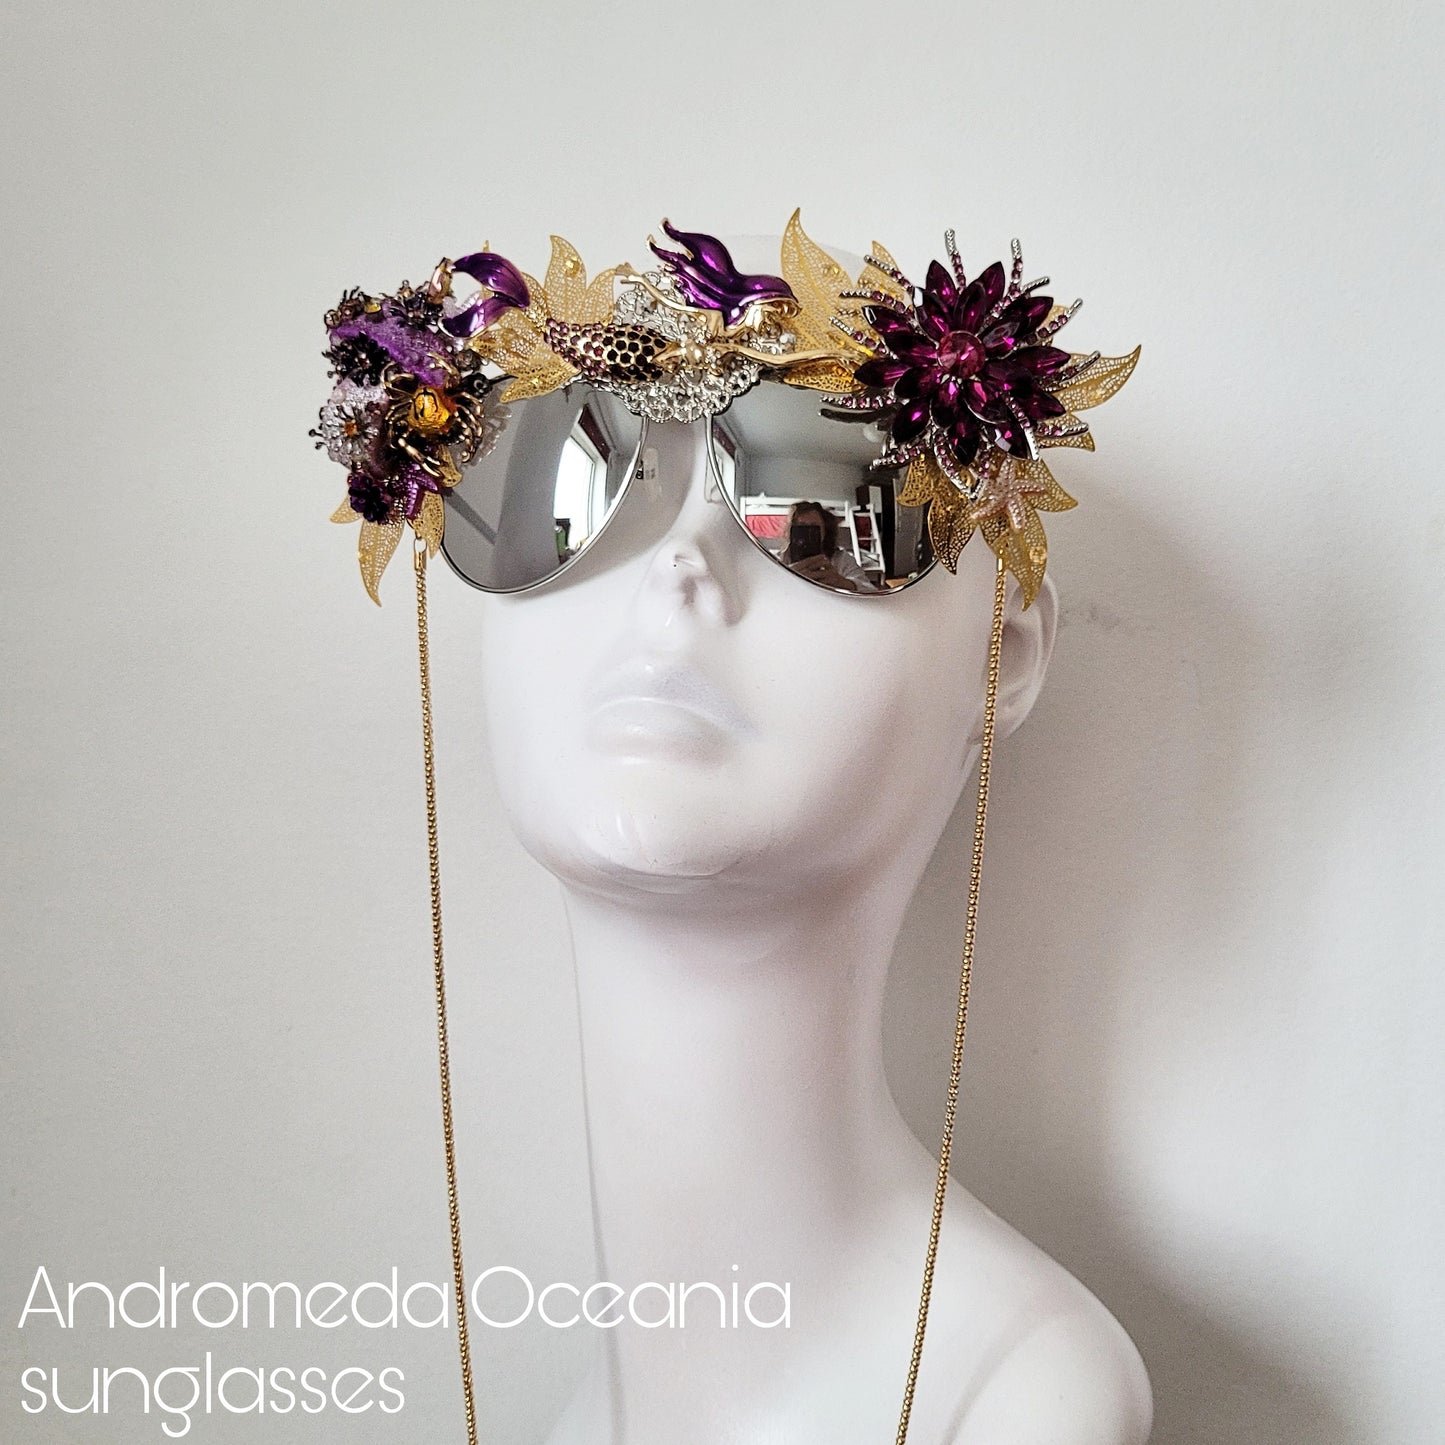 Shifting Depths collection: the Andromeda Oceania showpiece sunglasses